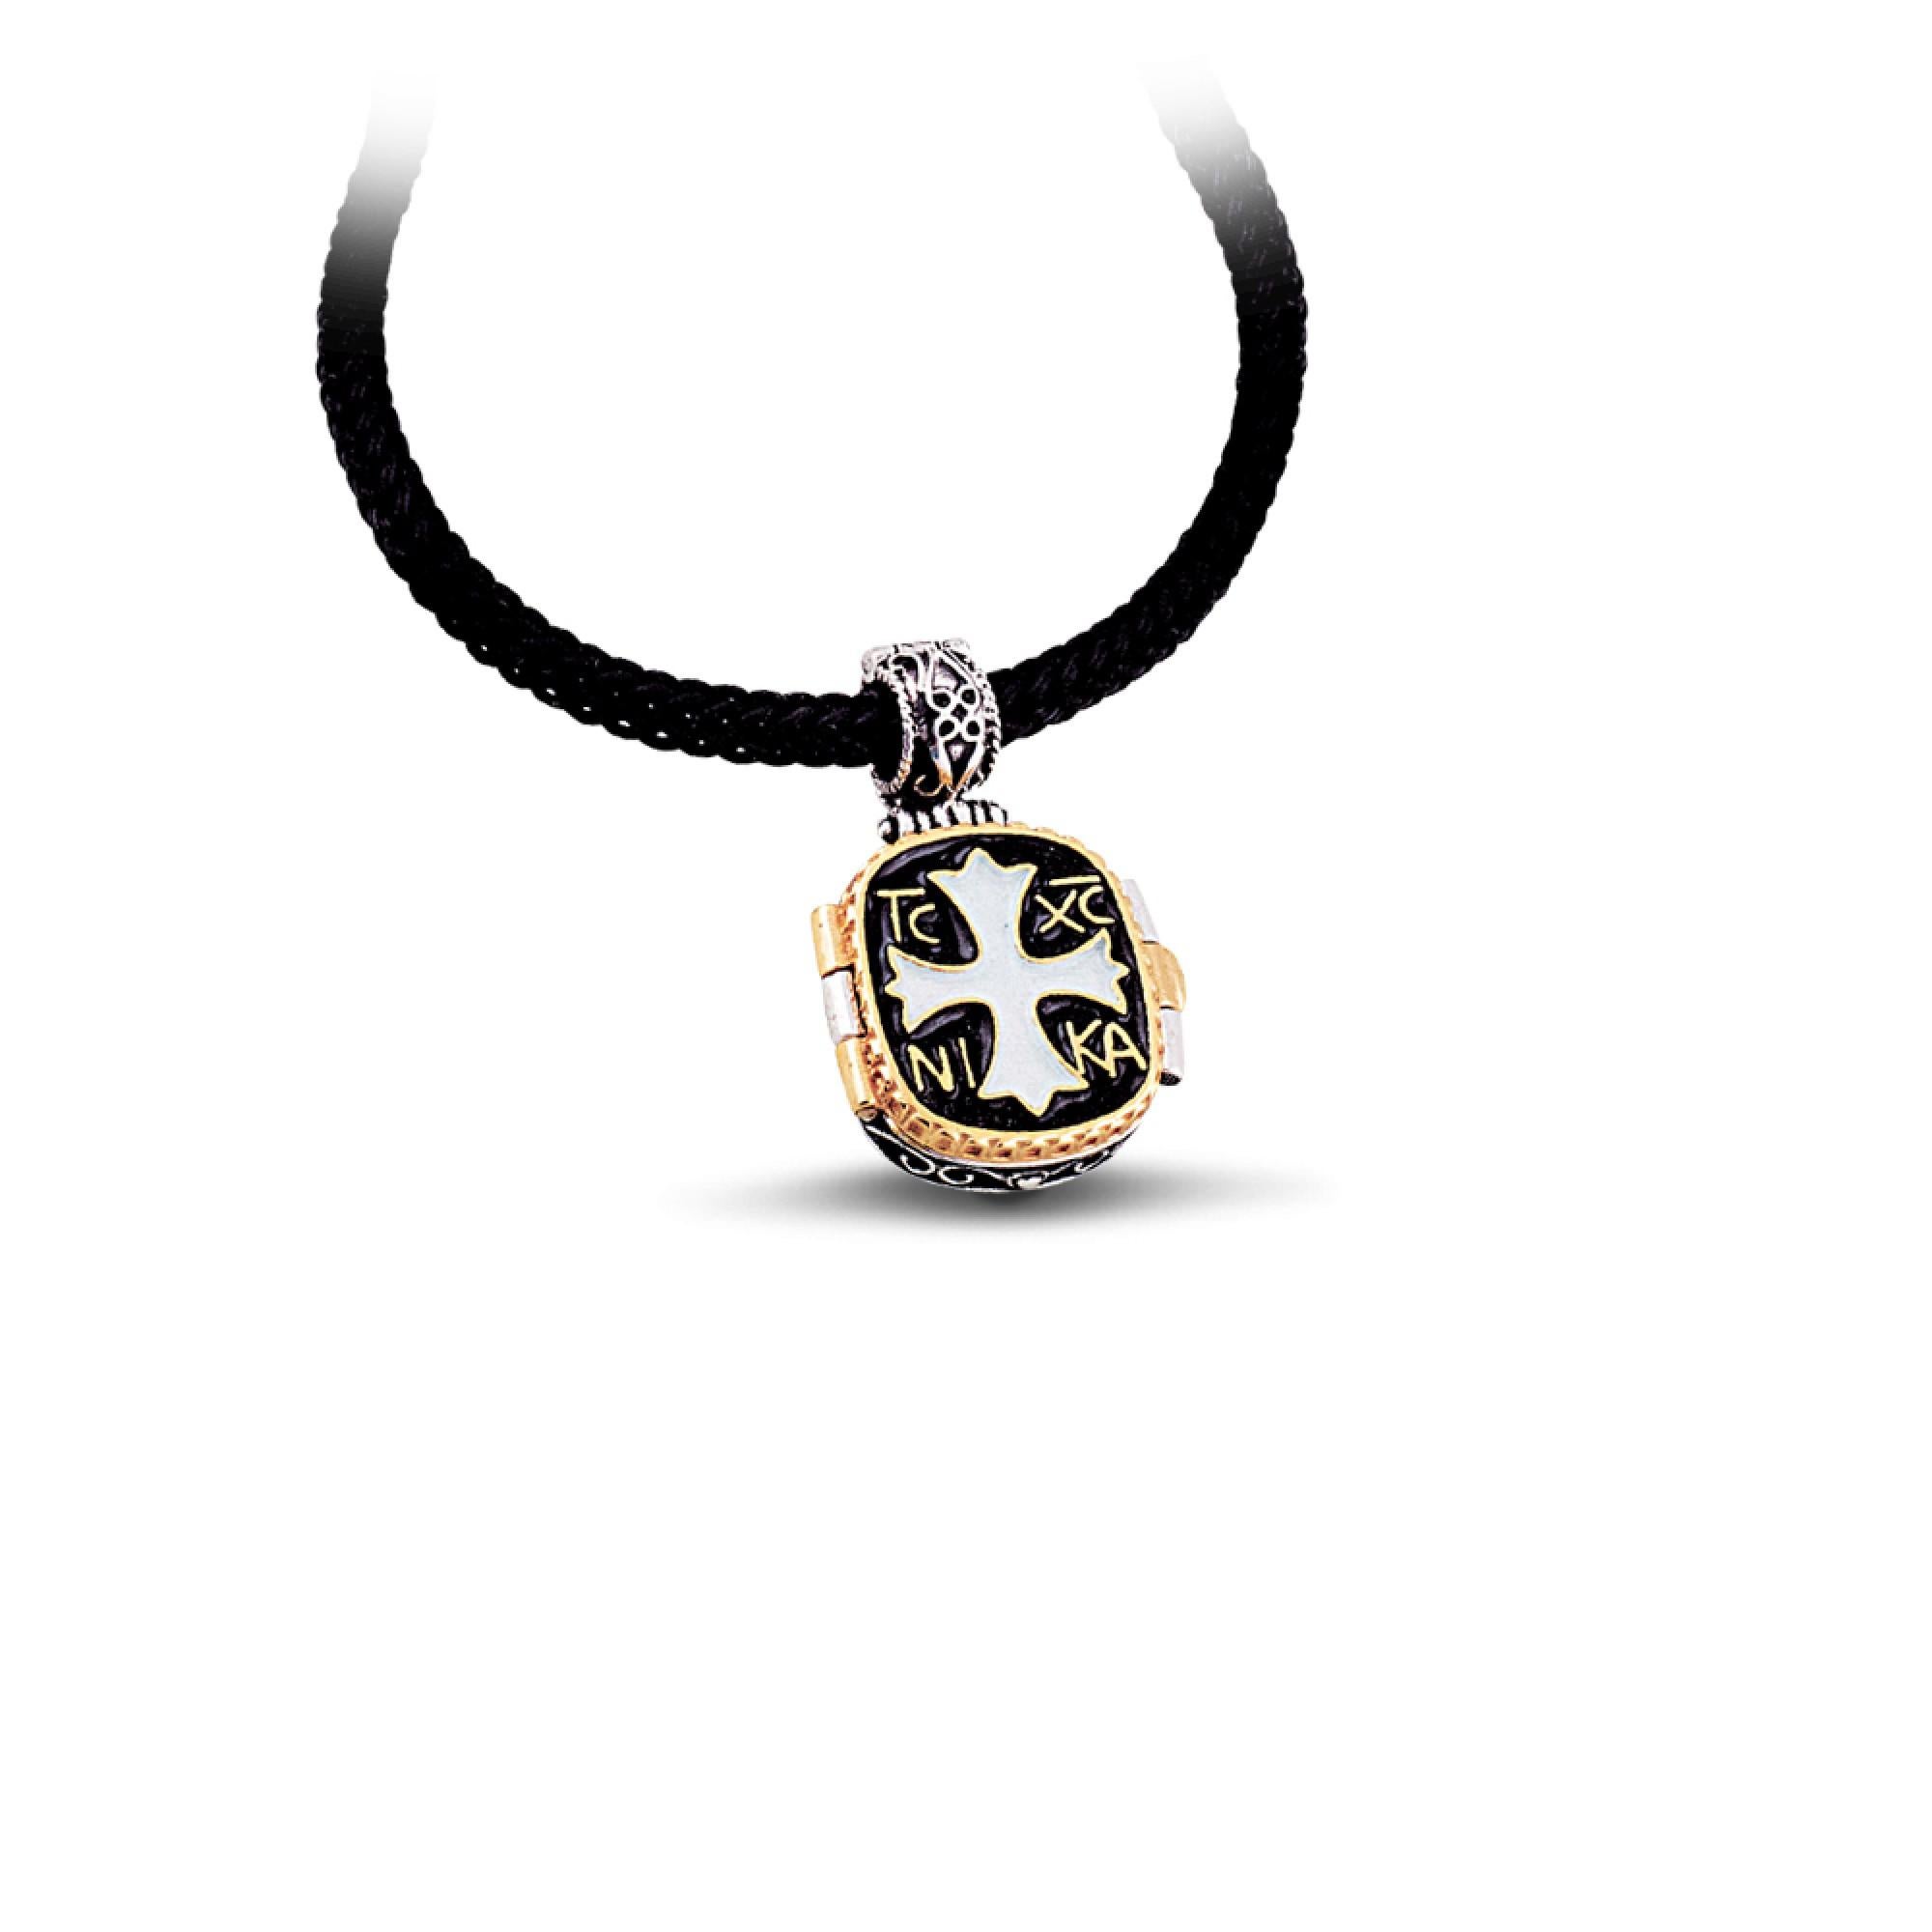 An unique sterling silver locket pendant from the Anax collection, with enamel touches on the top. 
The interior of the locket pendant has the representation of Saint George.

In Orthodox Christianity the well known Christian symbol, IC XC NI KA,